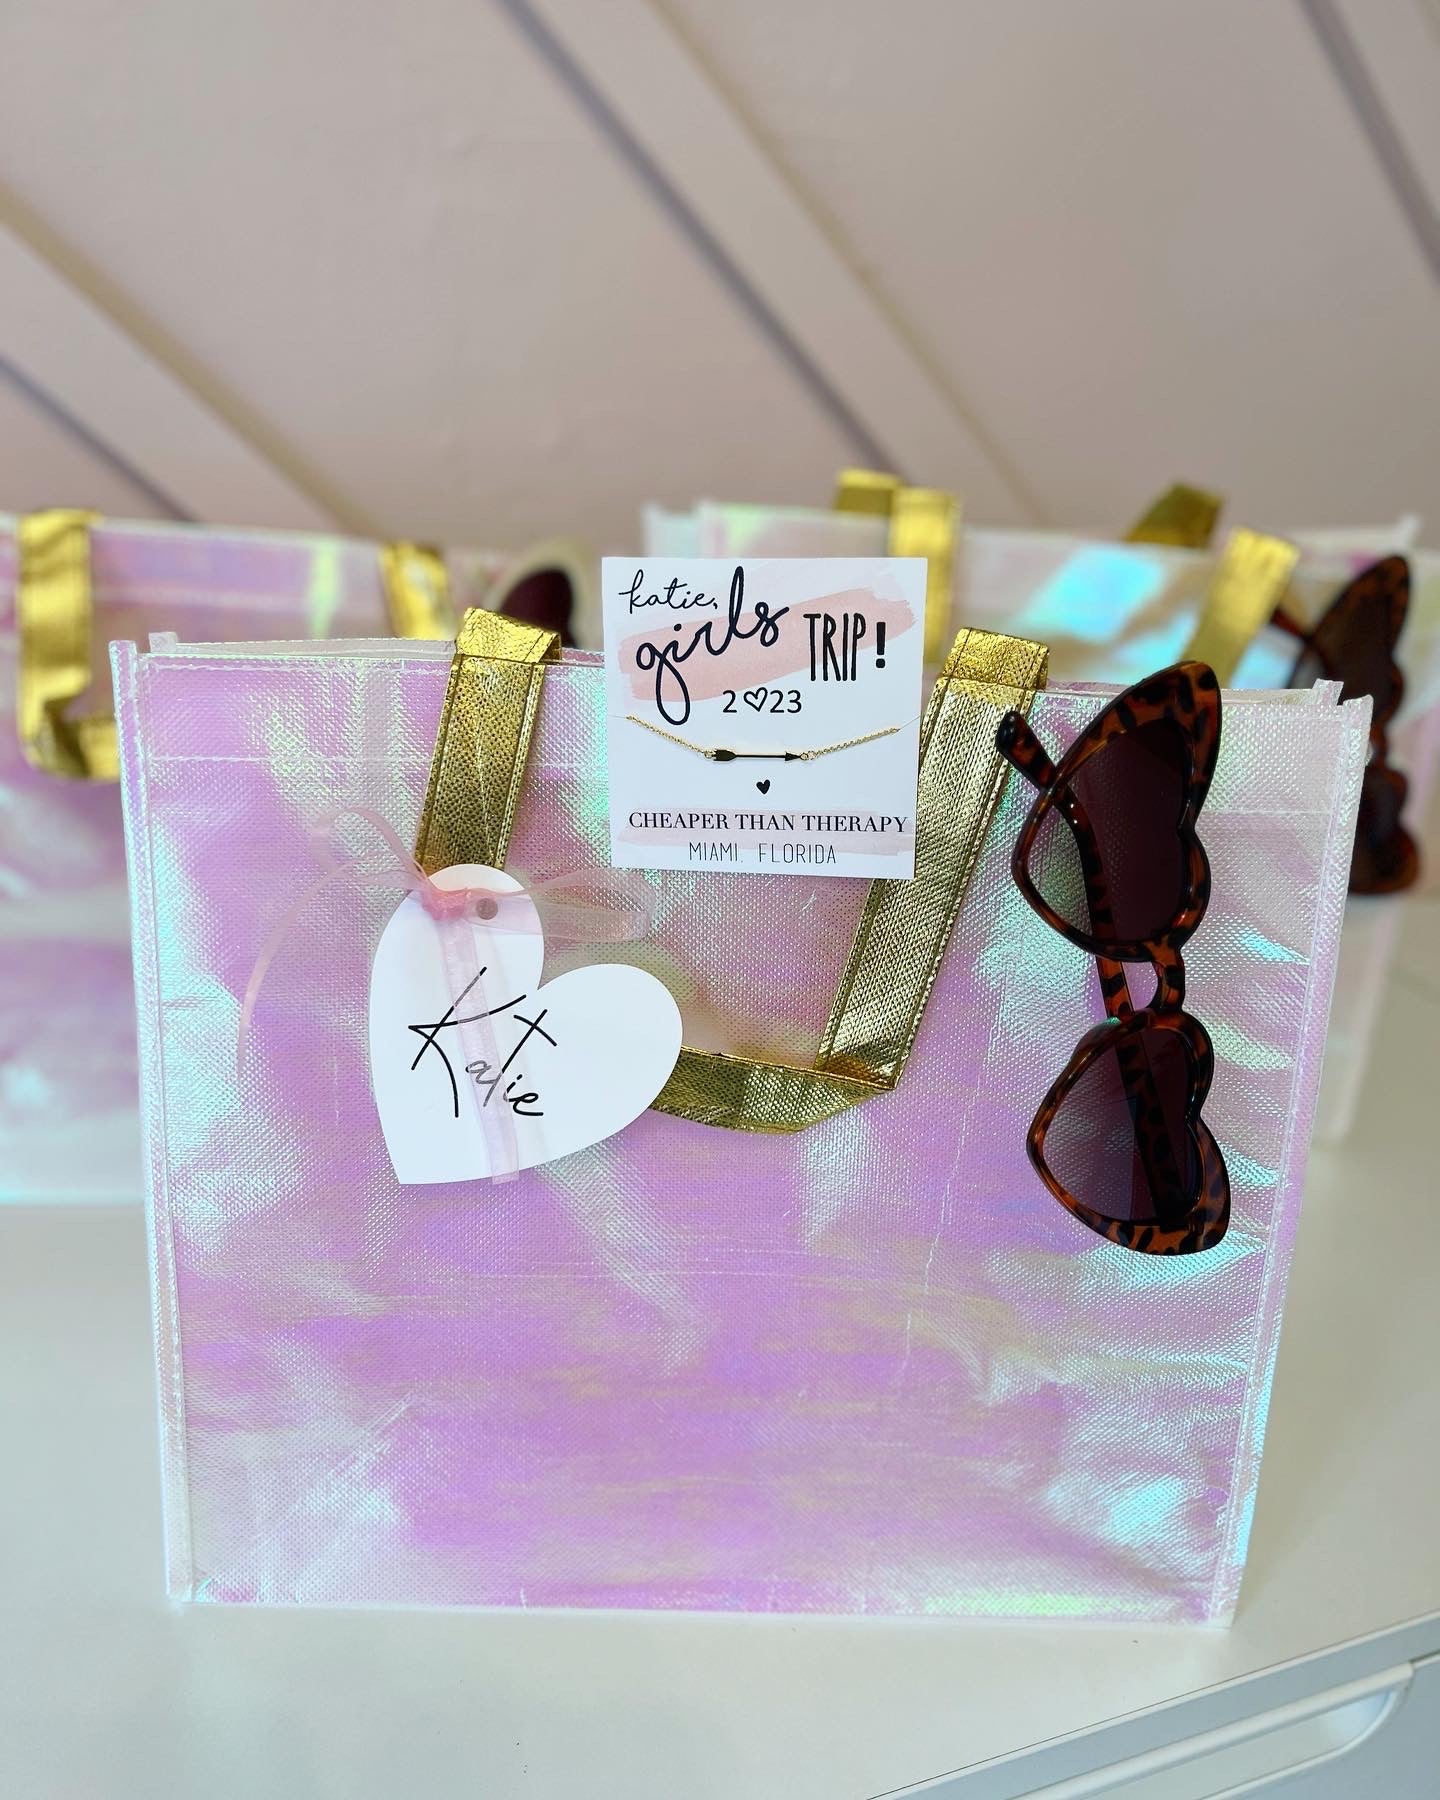 Iridescent Gold Handle Girls Trip Bag with Necklace & Glasses